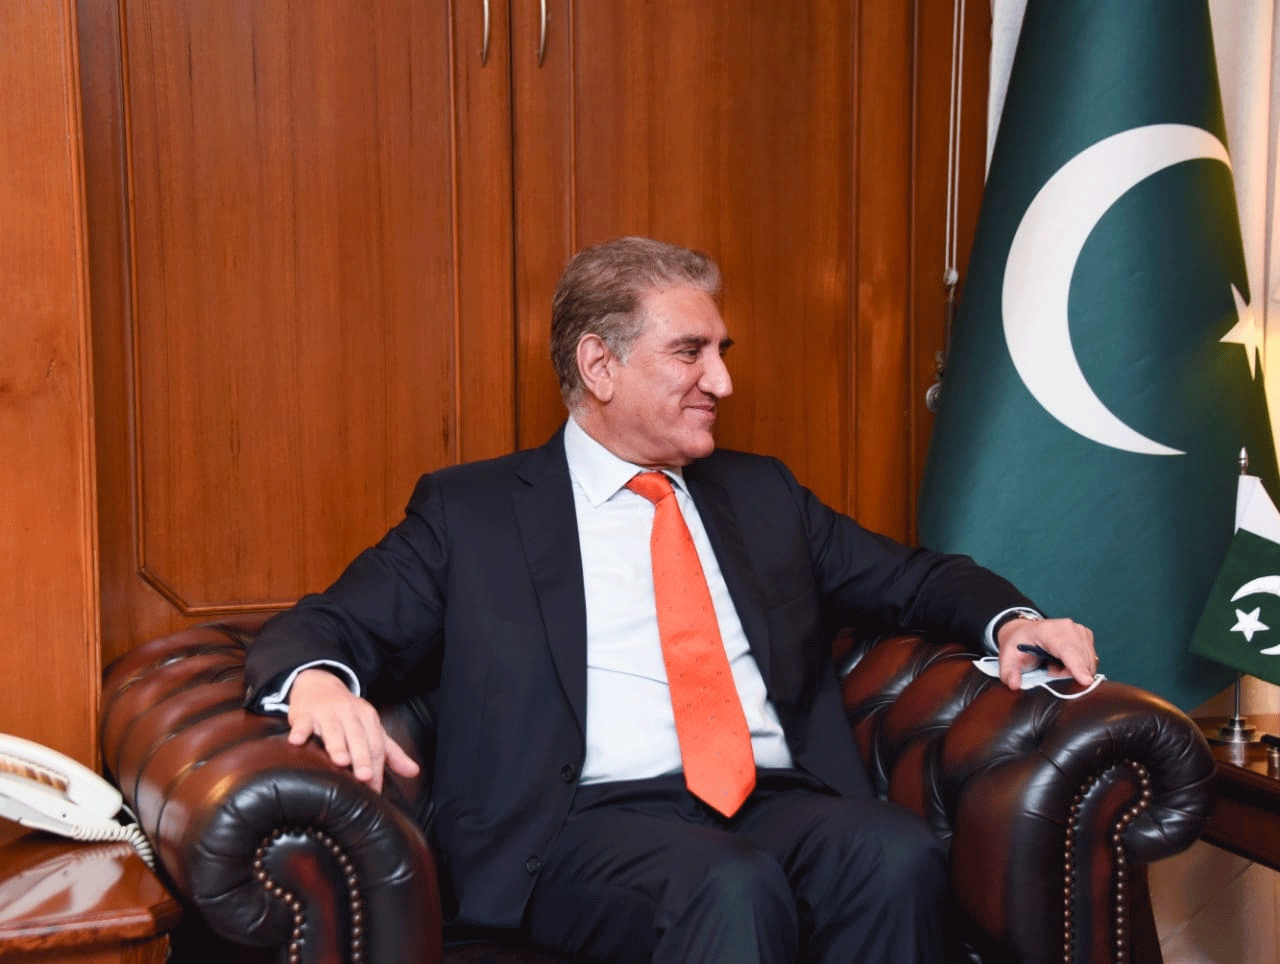 The welfare of Pakistanis abroad is one of our top priorities, Foreign Minister